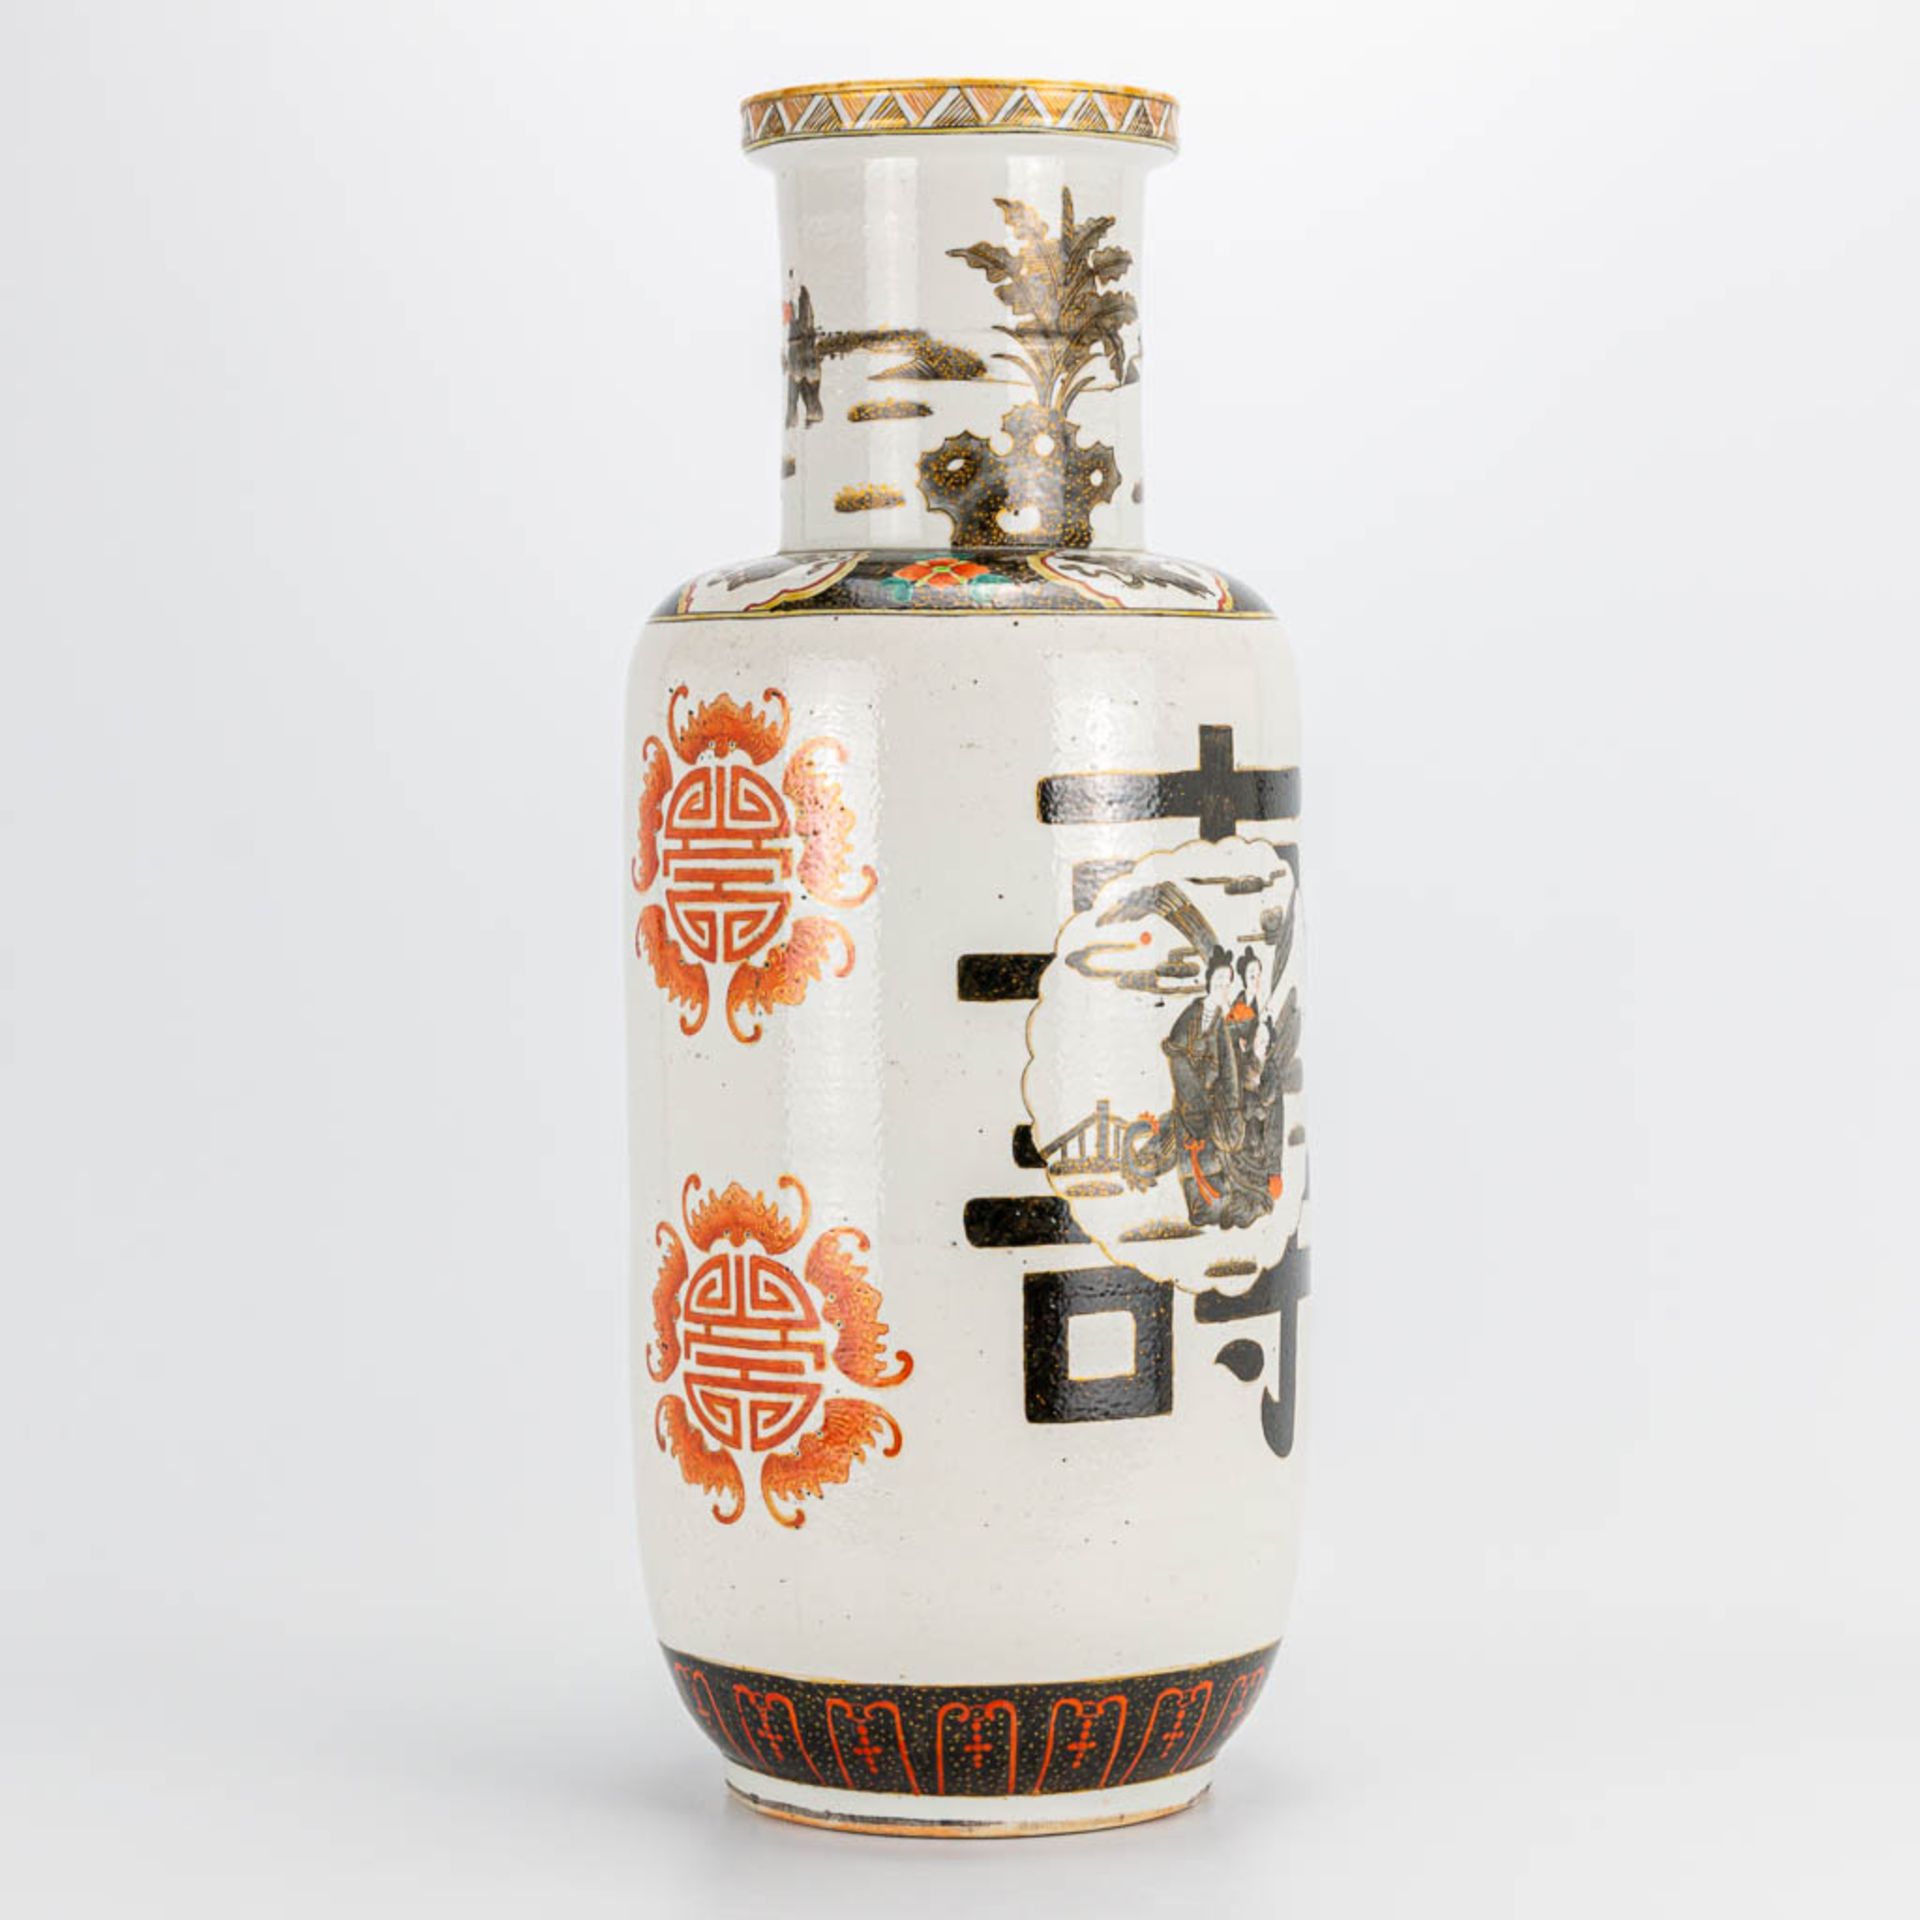 A Chinese vase with decor of wise men and calligraphic texts. 19th/20th century. (54 x 21 cm) - Image 4 of 21